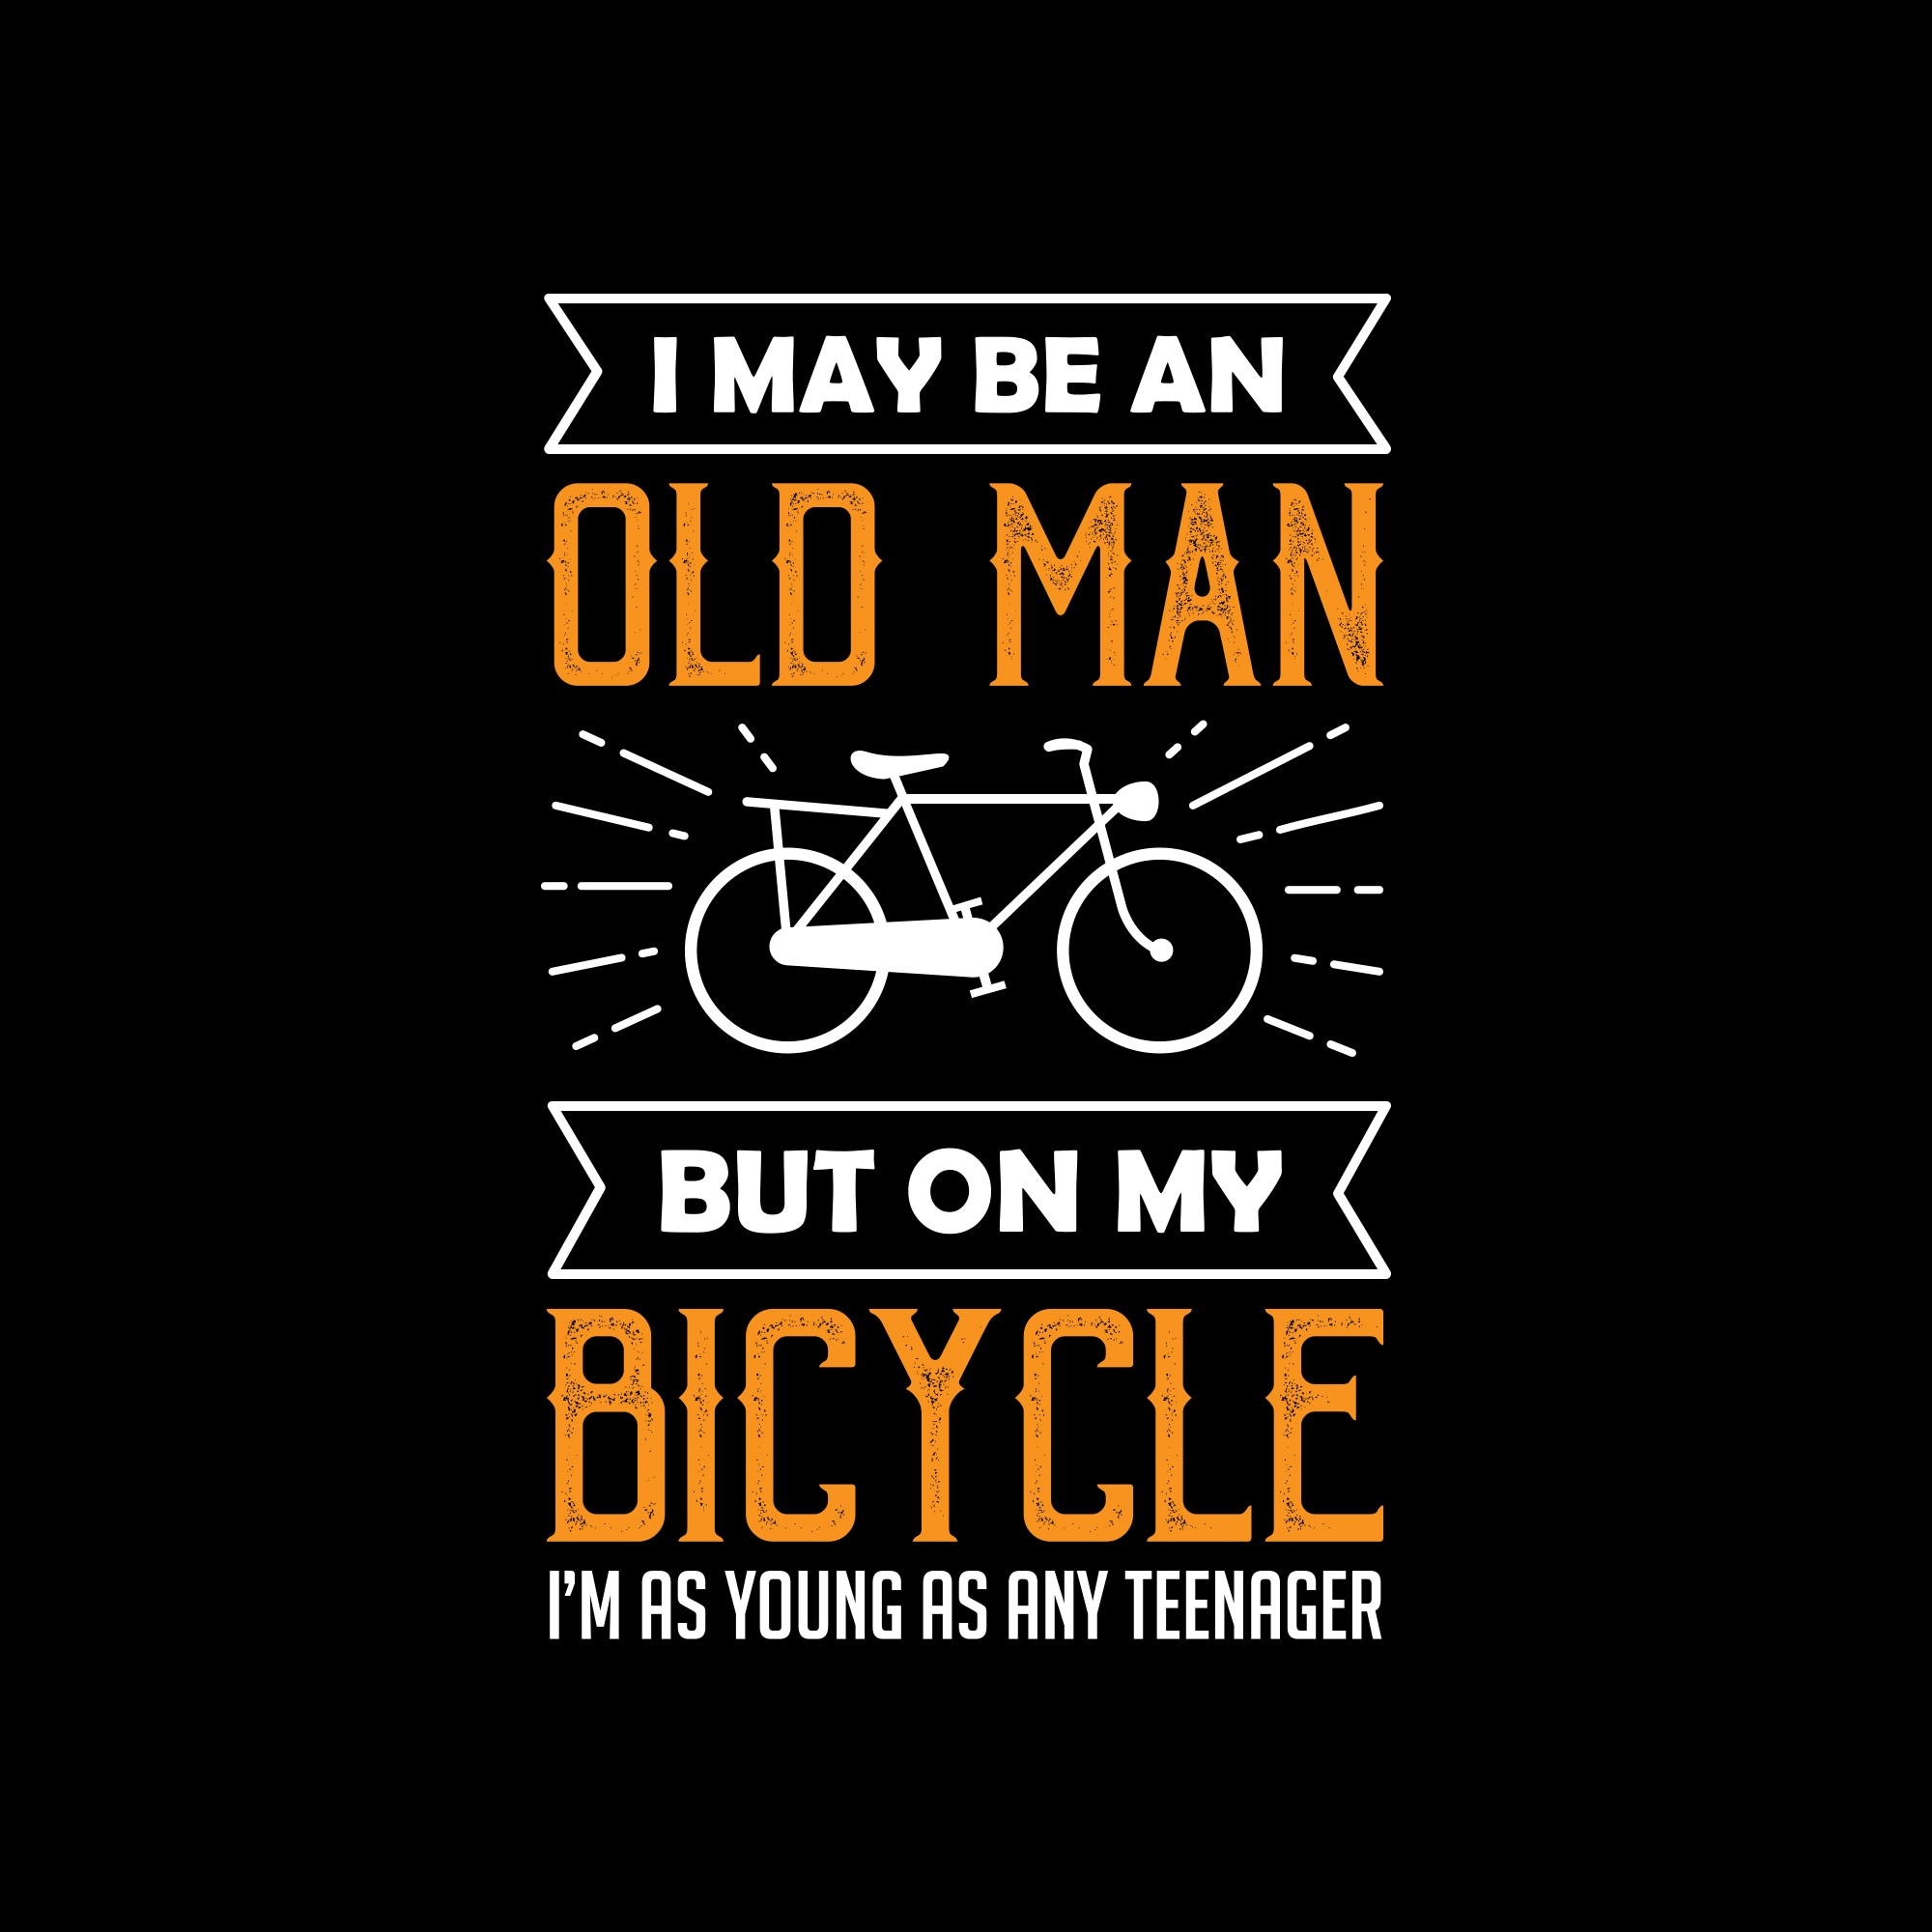 Happy World Bicycle Day 2022 Wishes, Greetings, Whatsapp Status, Images And Quotes You Can Share With Your Dear Ones. (Image: Shutterstock) 